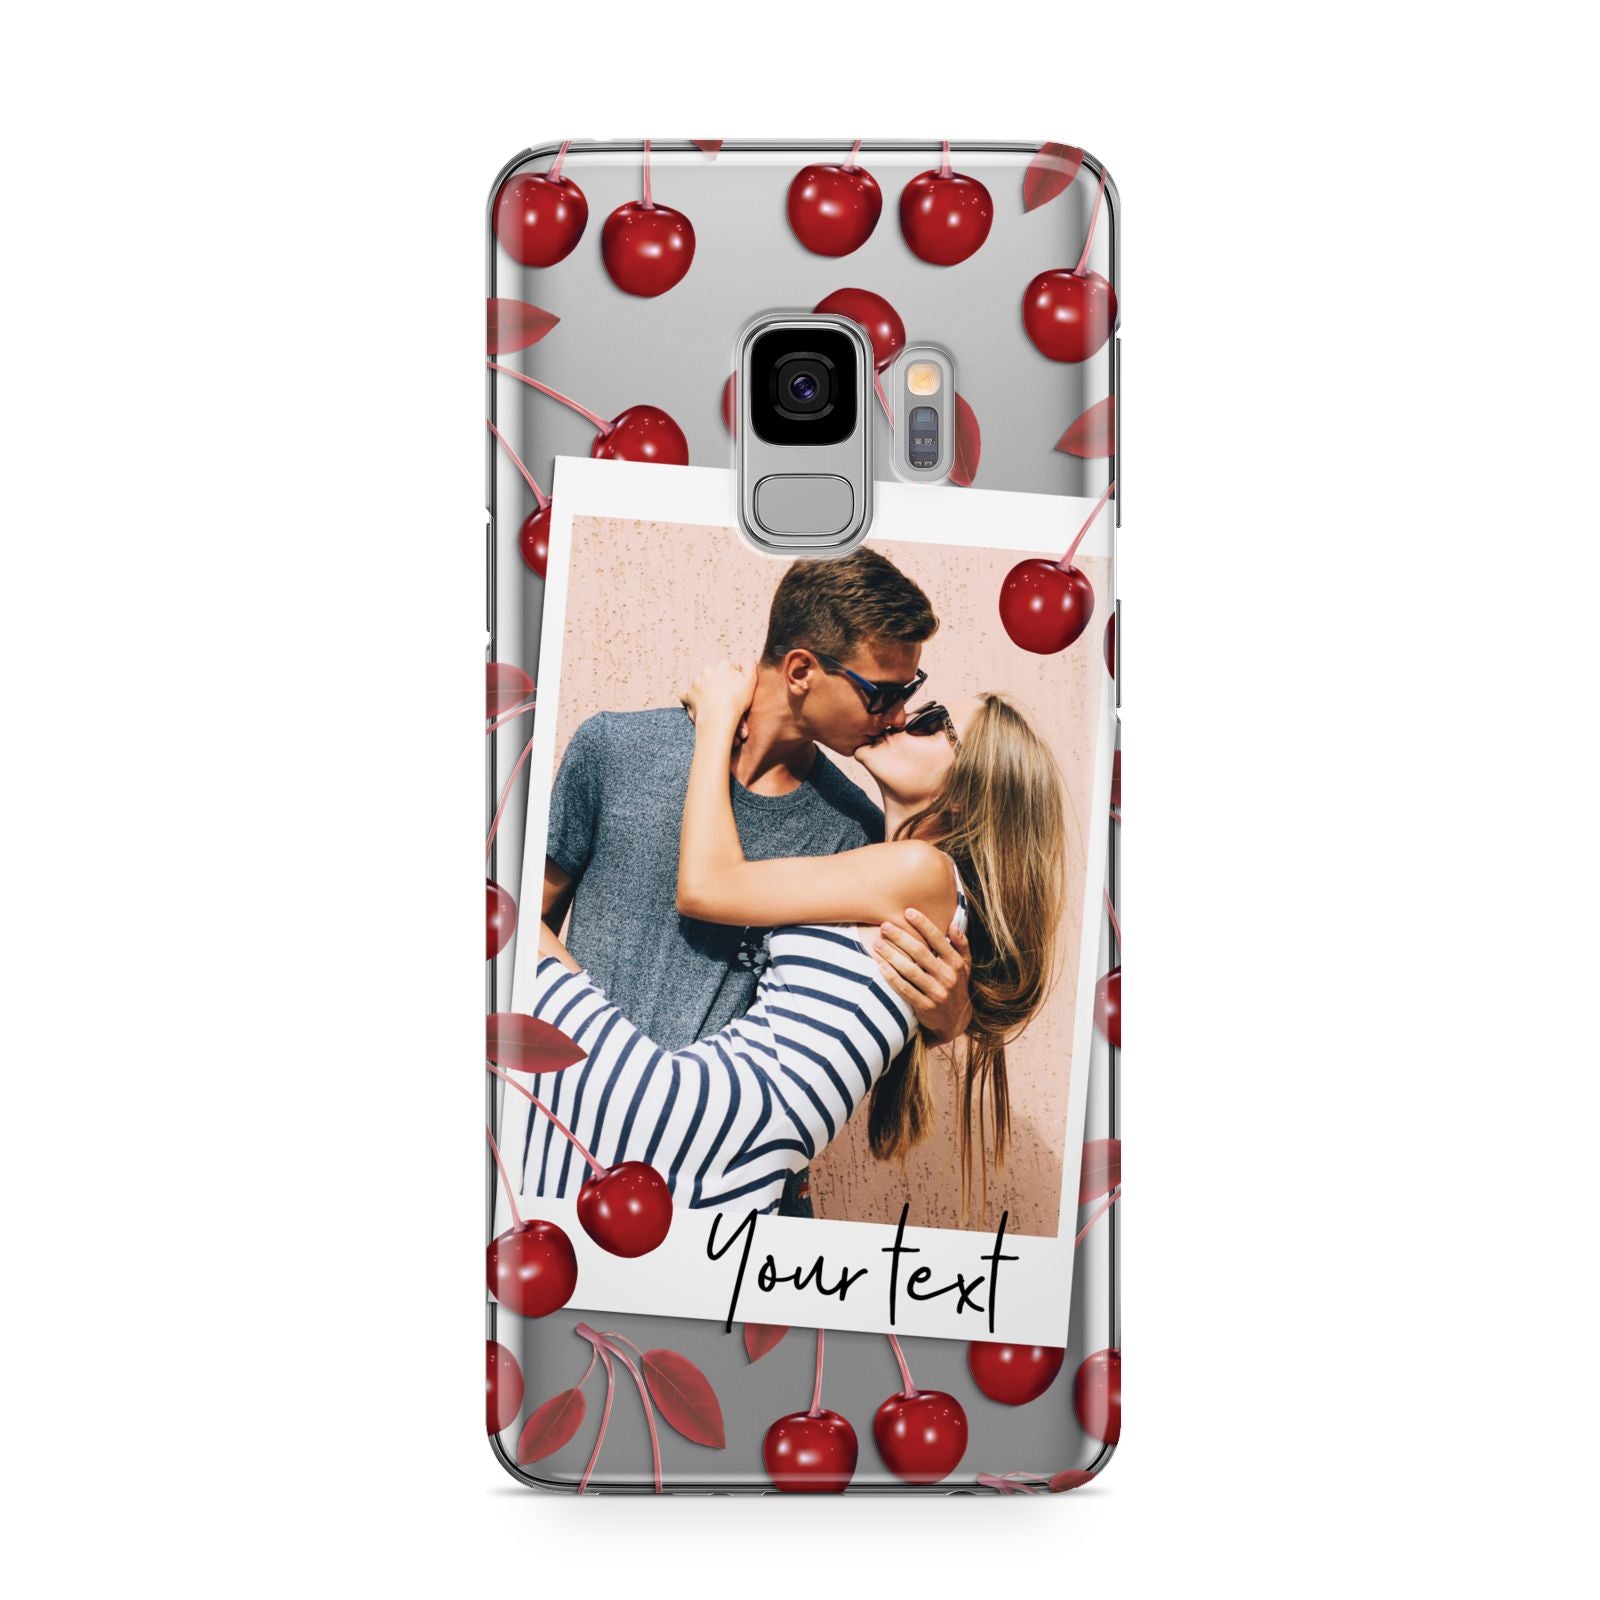 Personalised Photo Cherry Samsung Galaxy S9 Case